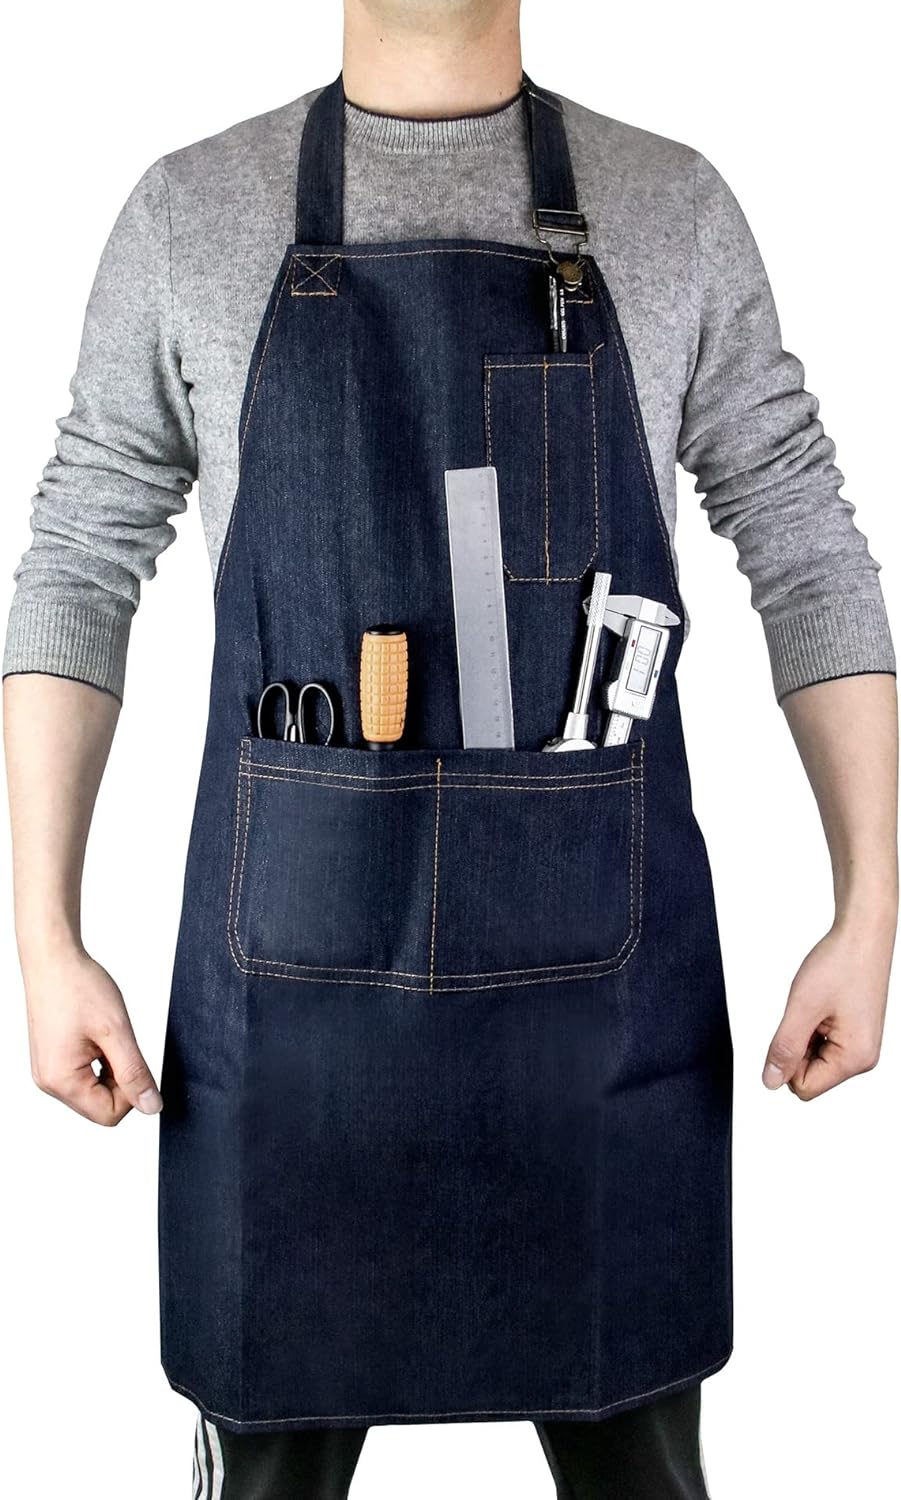 Generic QWORK Heavy Duty Denim Work Apron With Pockets, Adjustable Jean Tool Apron for Men and Women